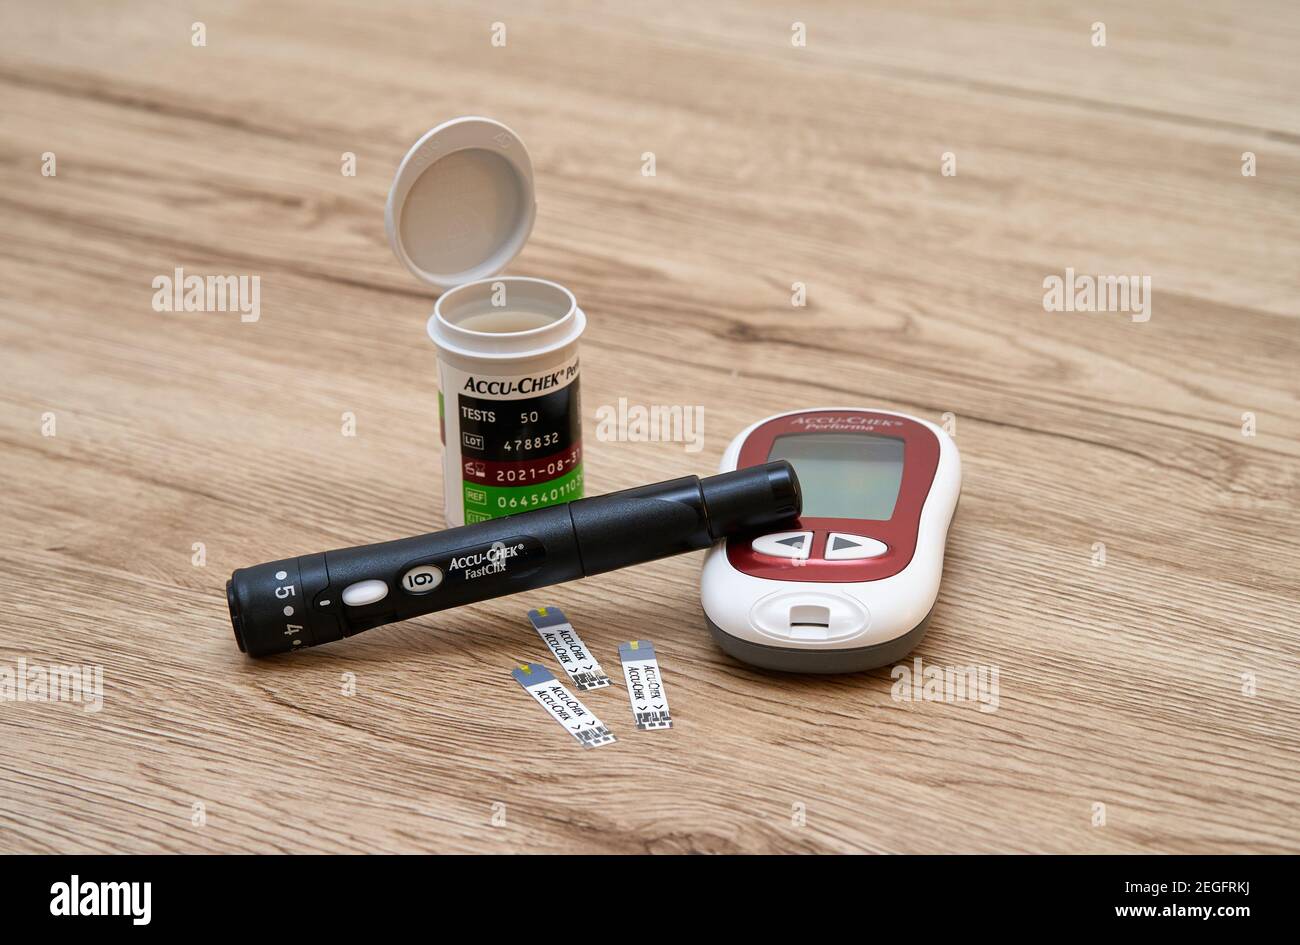 Equipment Accu-Check for measuring blood sugar at home - glucometer test strips and lancet. Stock Photo